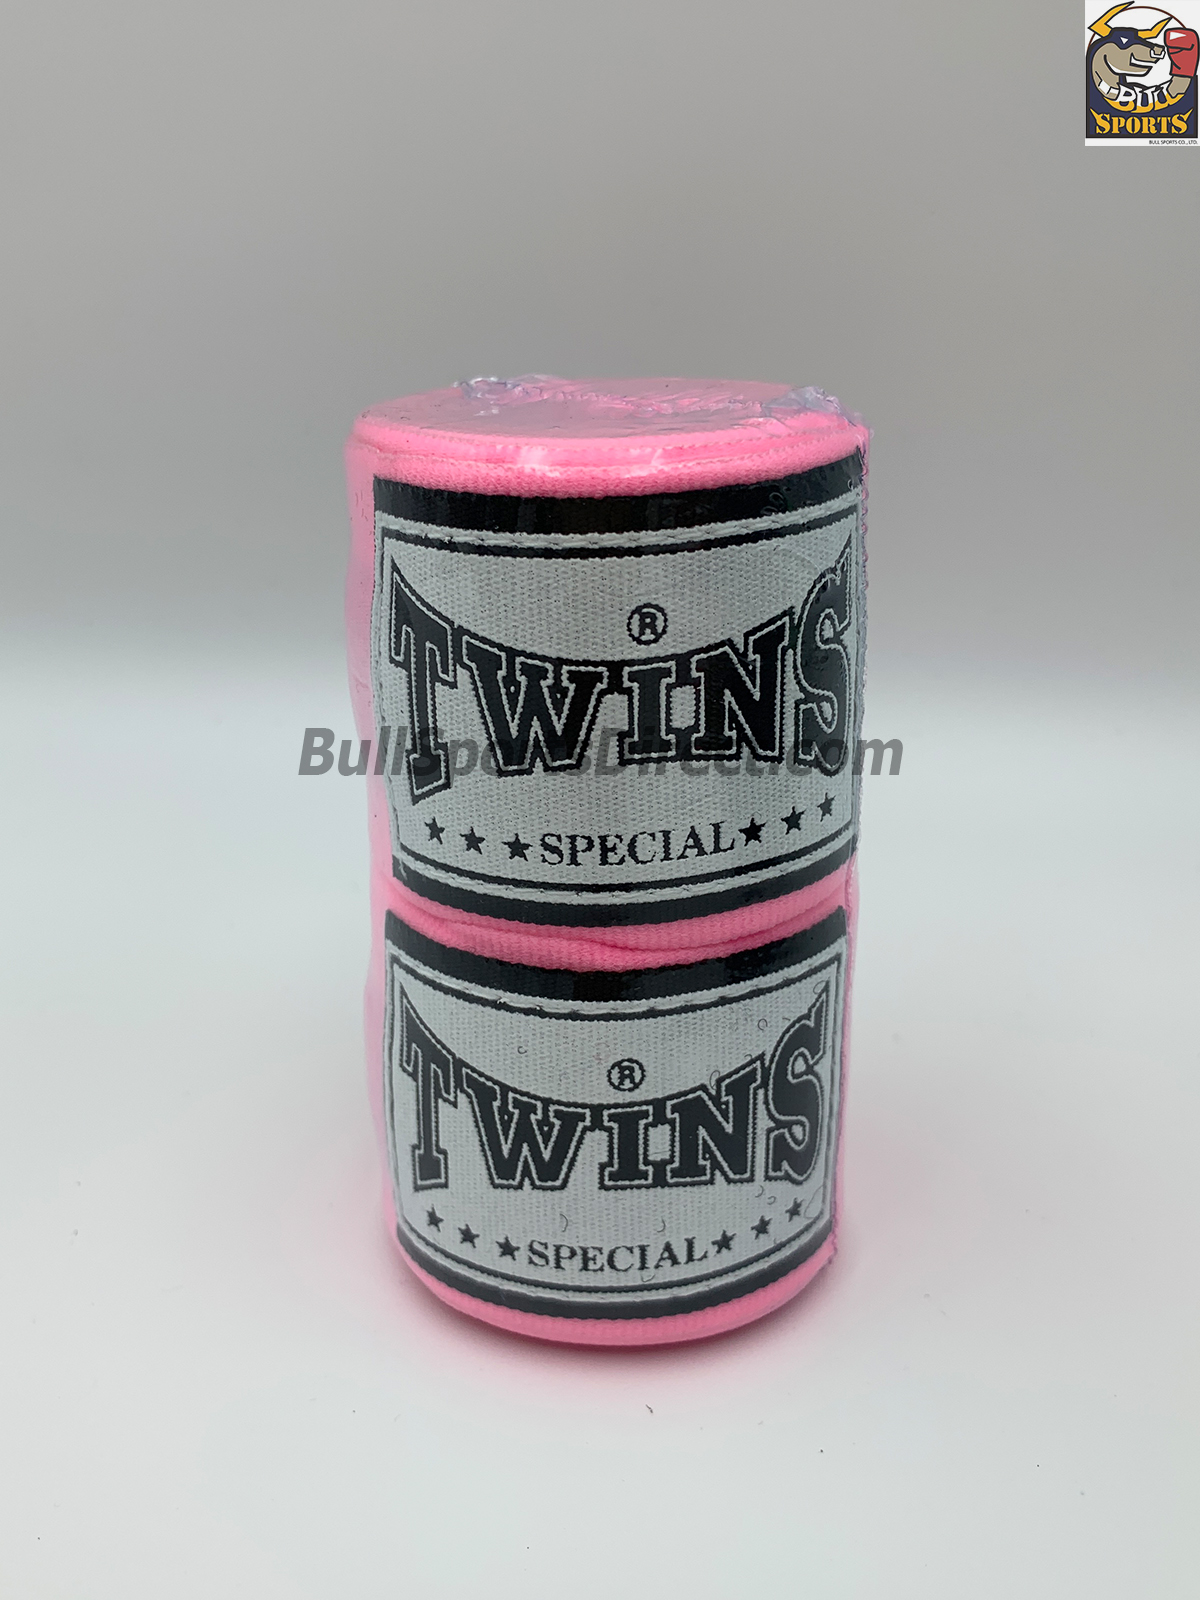 TWINS SPECIAL CH-5 HAND WRAPS 5 METERS MUAY THAI BOXING ELASTIC PROTECTORS SOLID